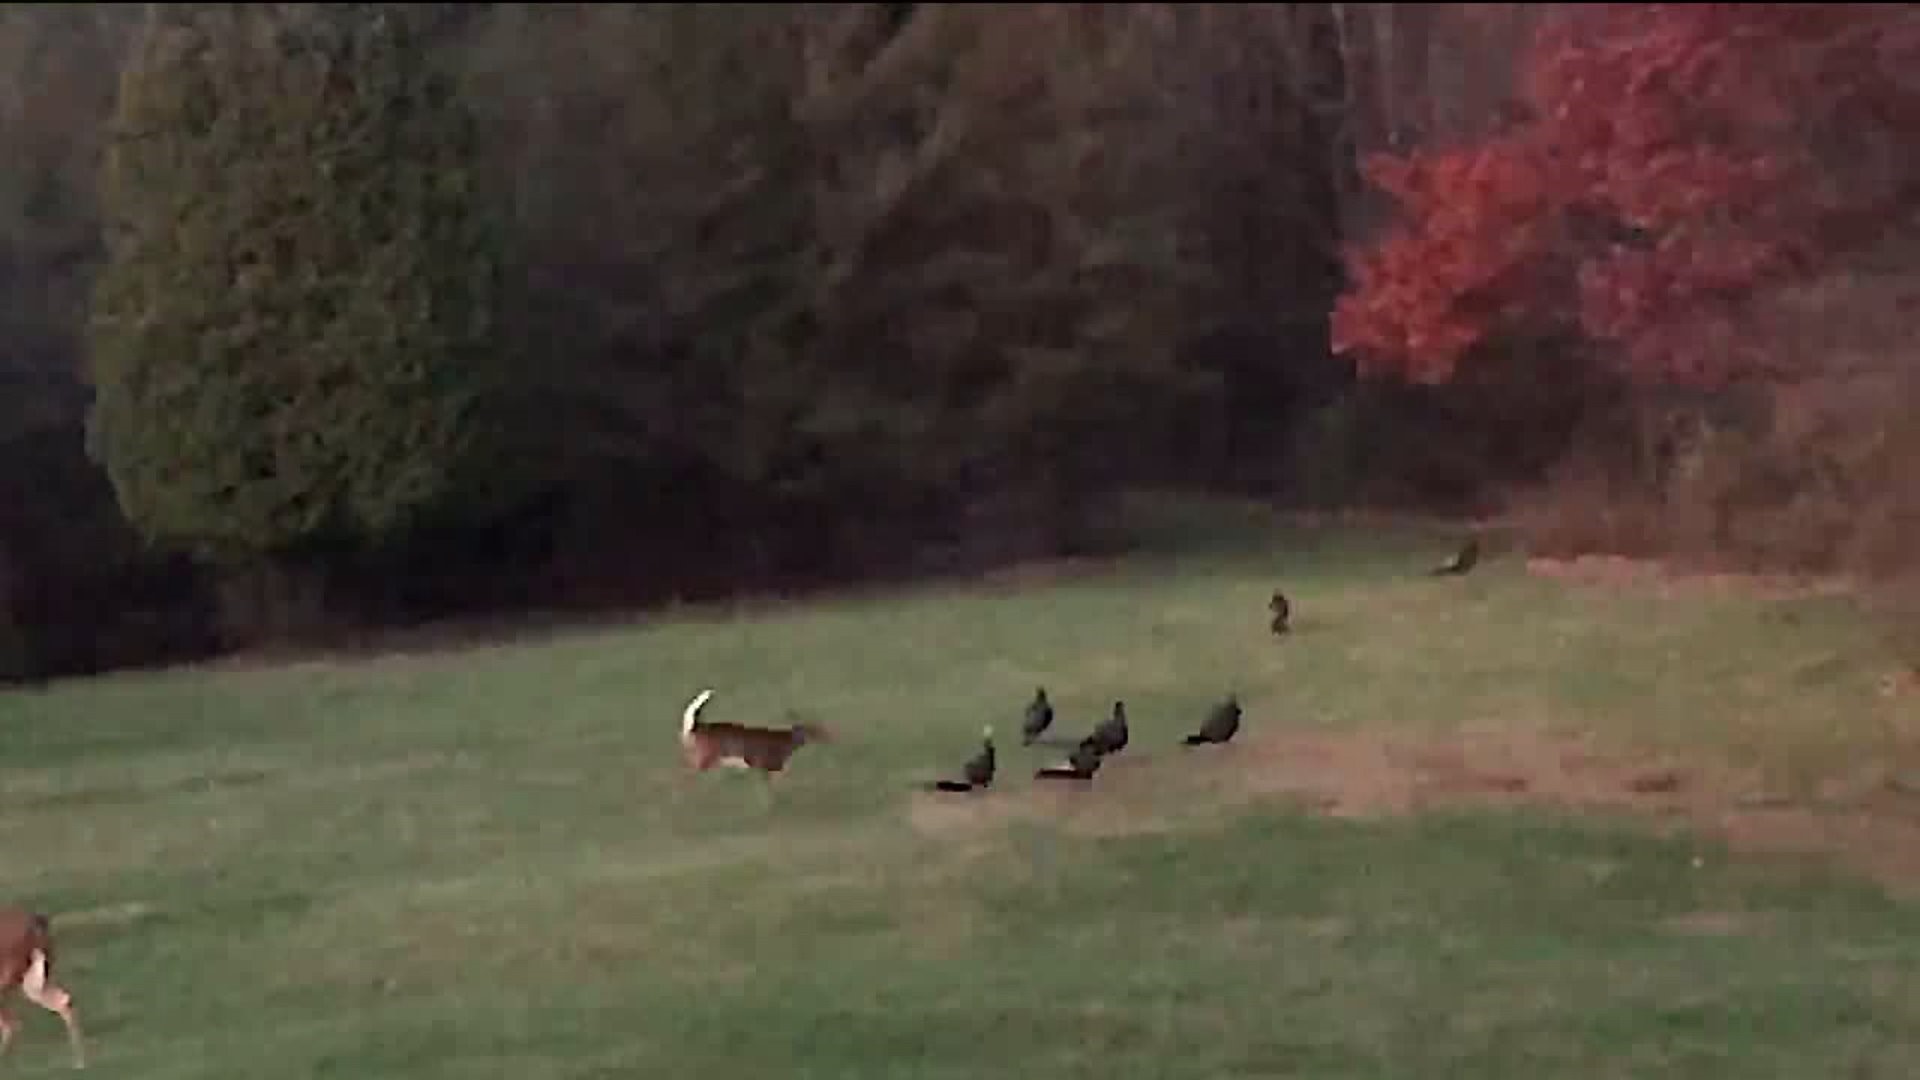 Check This Out: Deer Playfully Chases Group of Turkeys in Schuylkill County